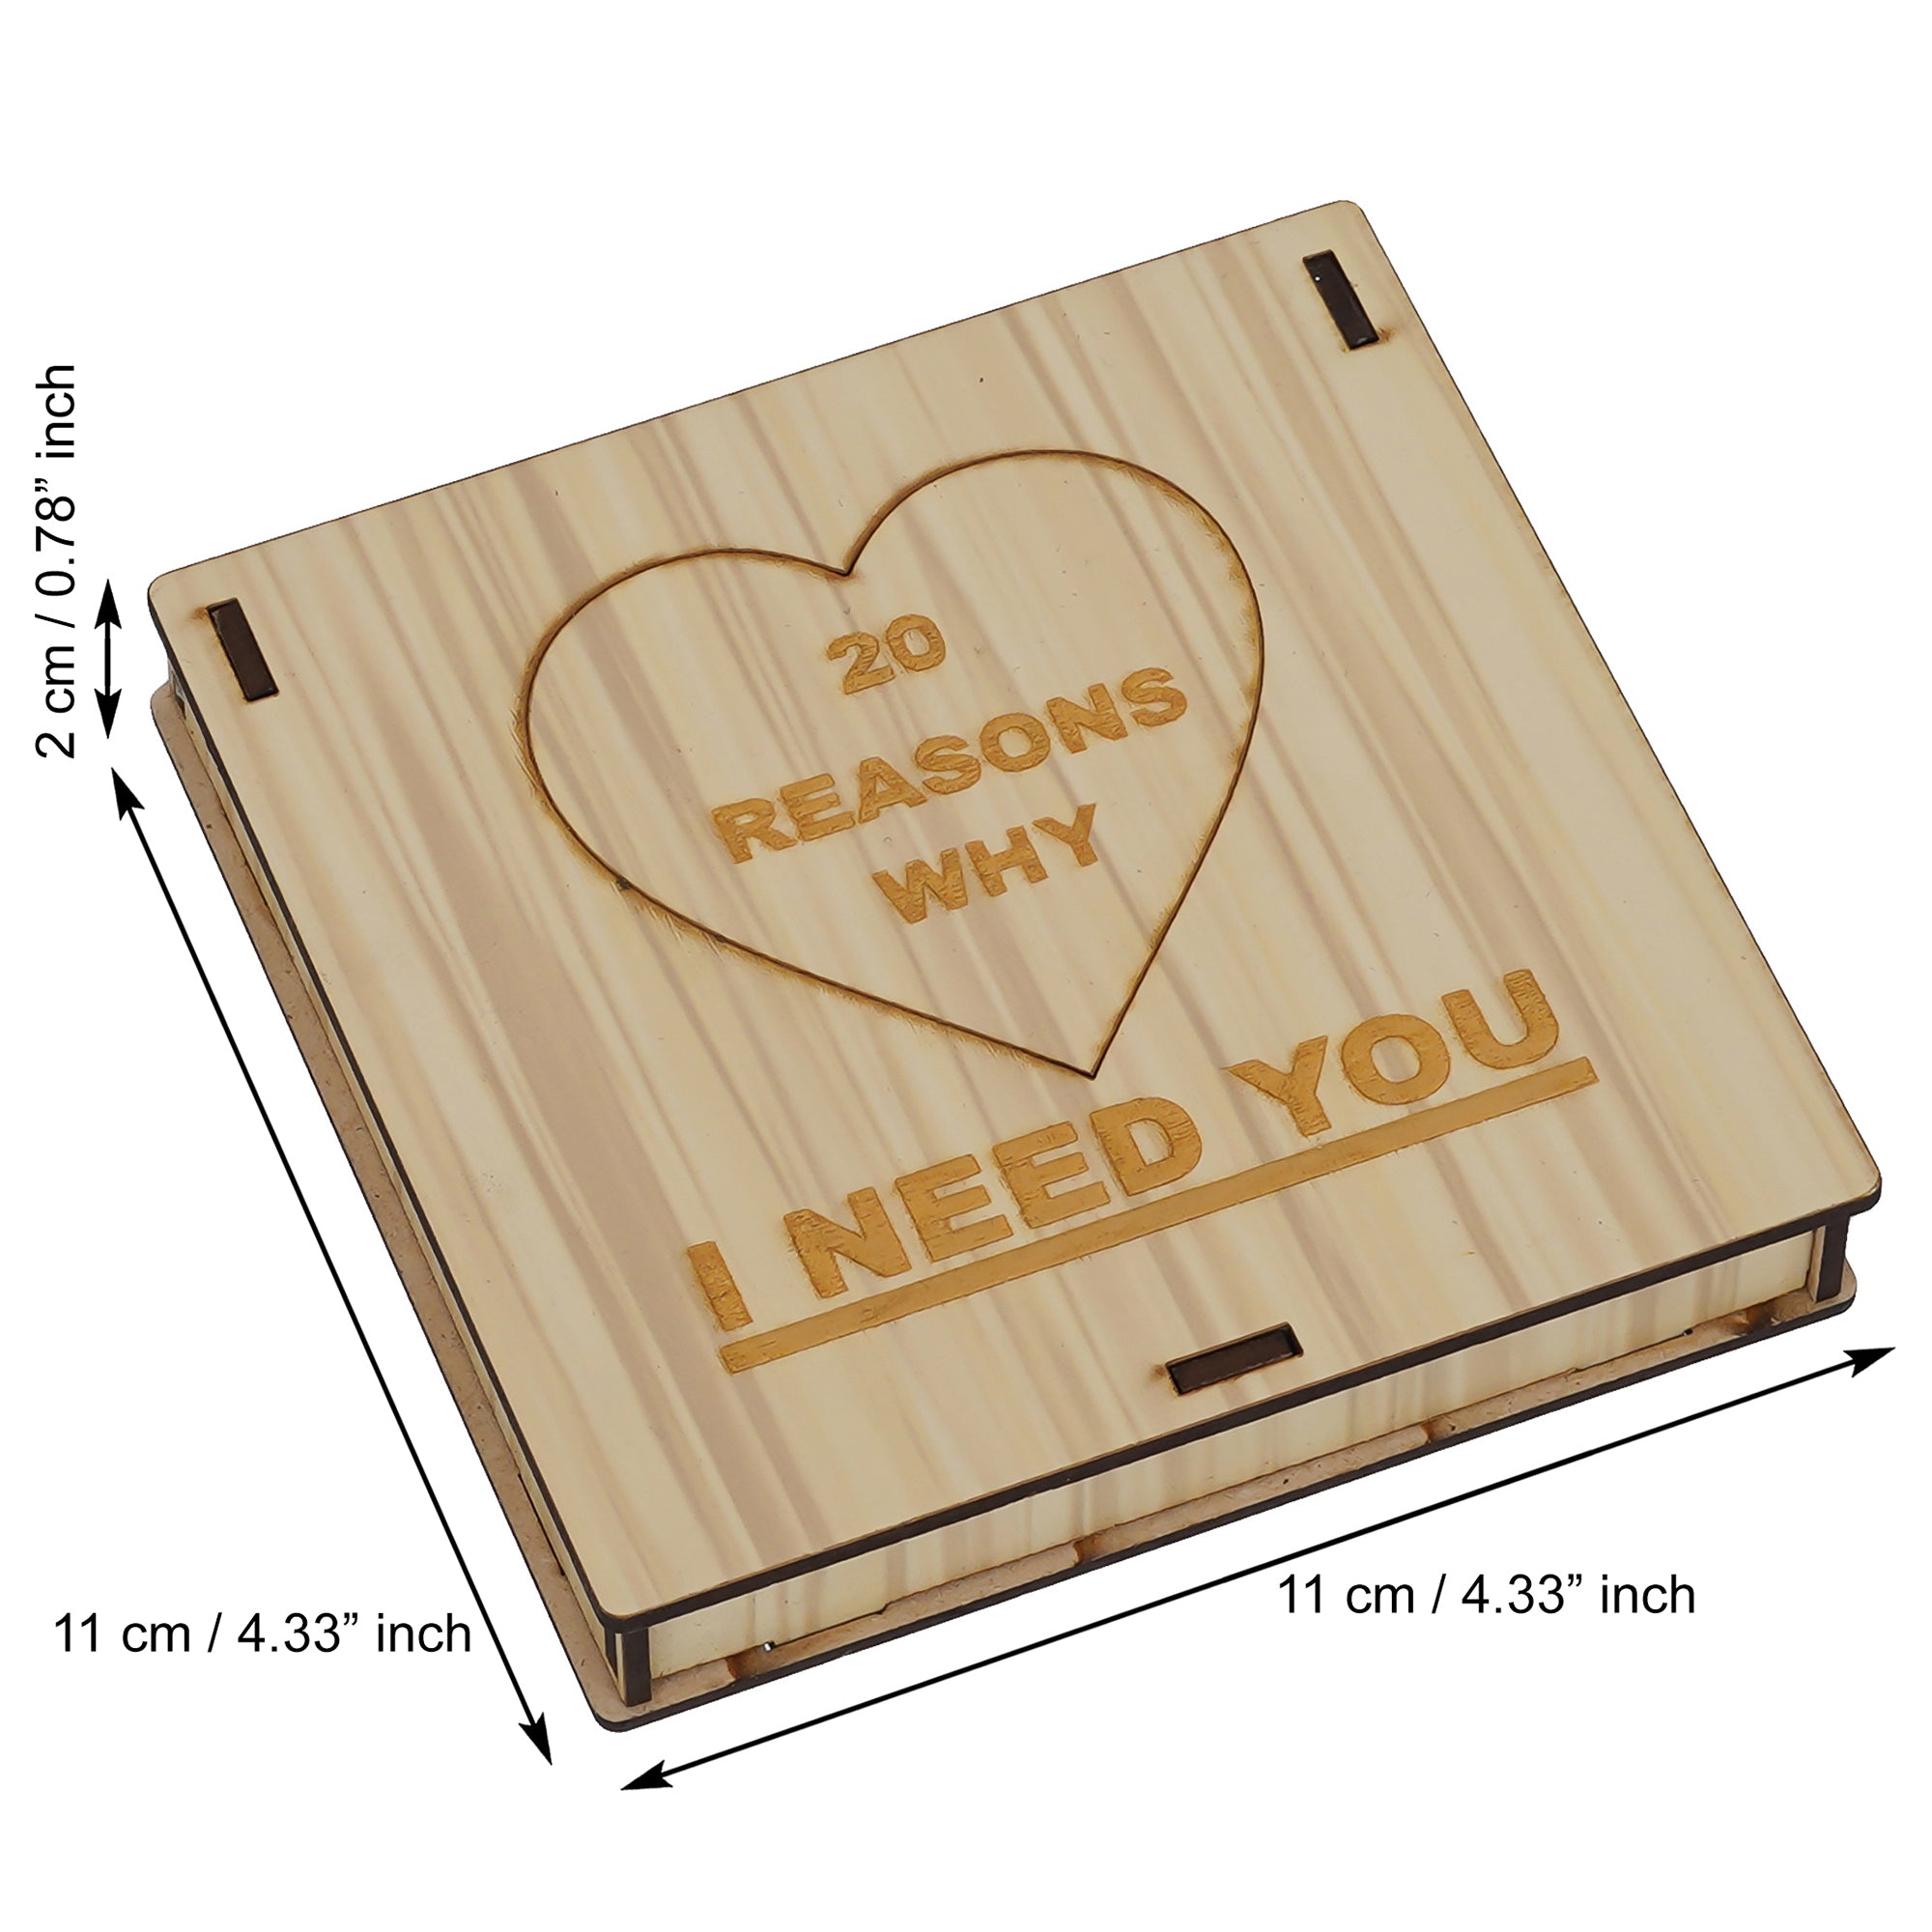 Valentine Combo of Card, Heart Shaped Gift Box Set with White Teddy and Red Roses, "20 Reasons Why I Need You" Printed on Little Hearts Wooden Gift Set 6